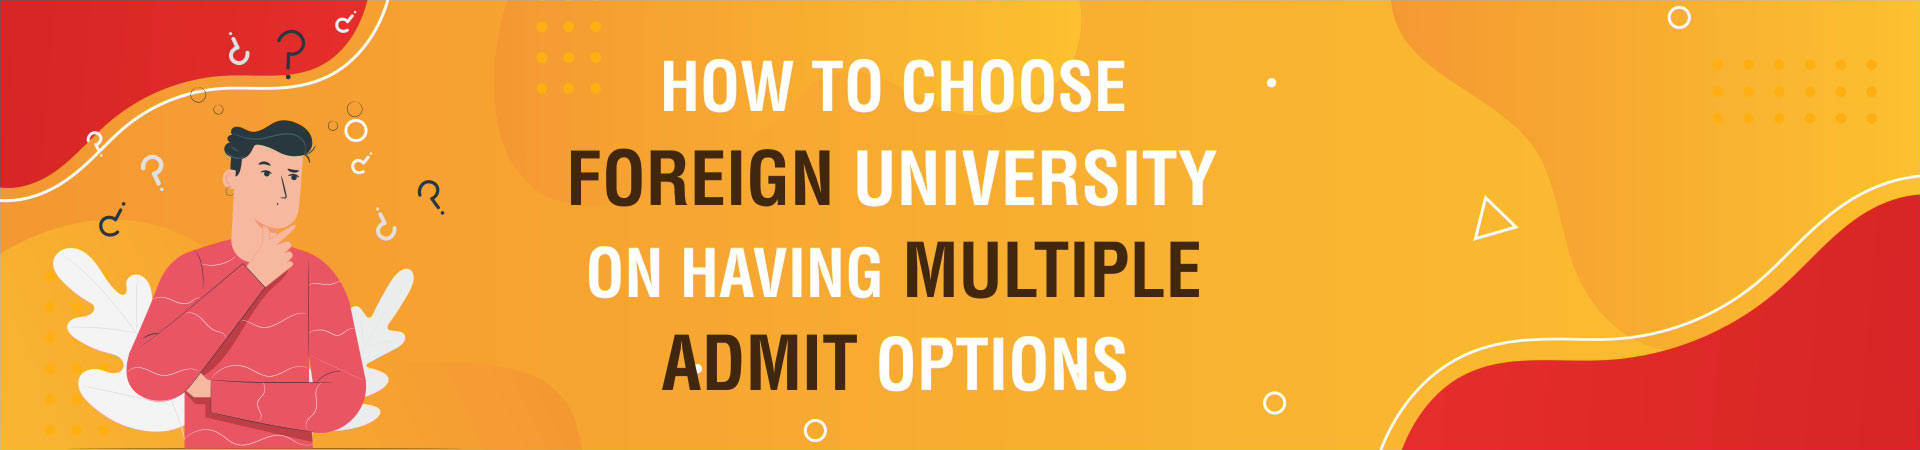 How to choose foreign university or college on having multiple admit options